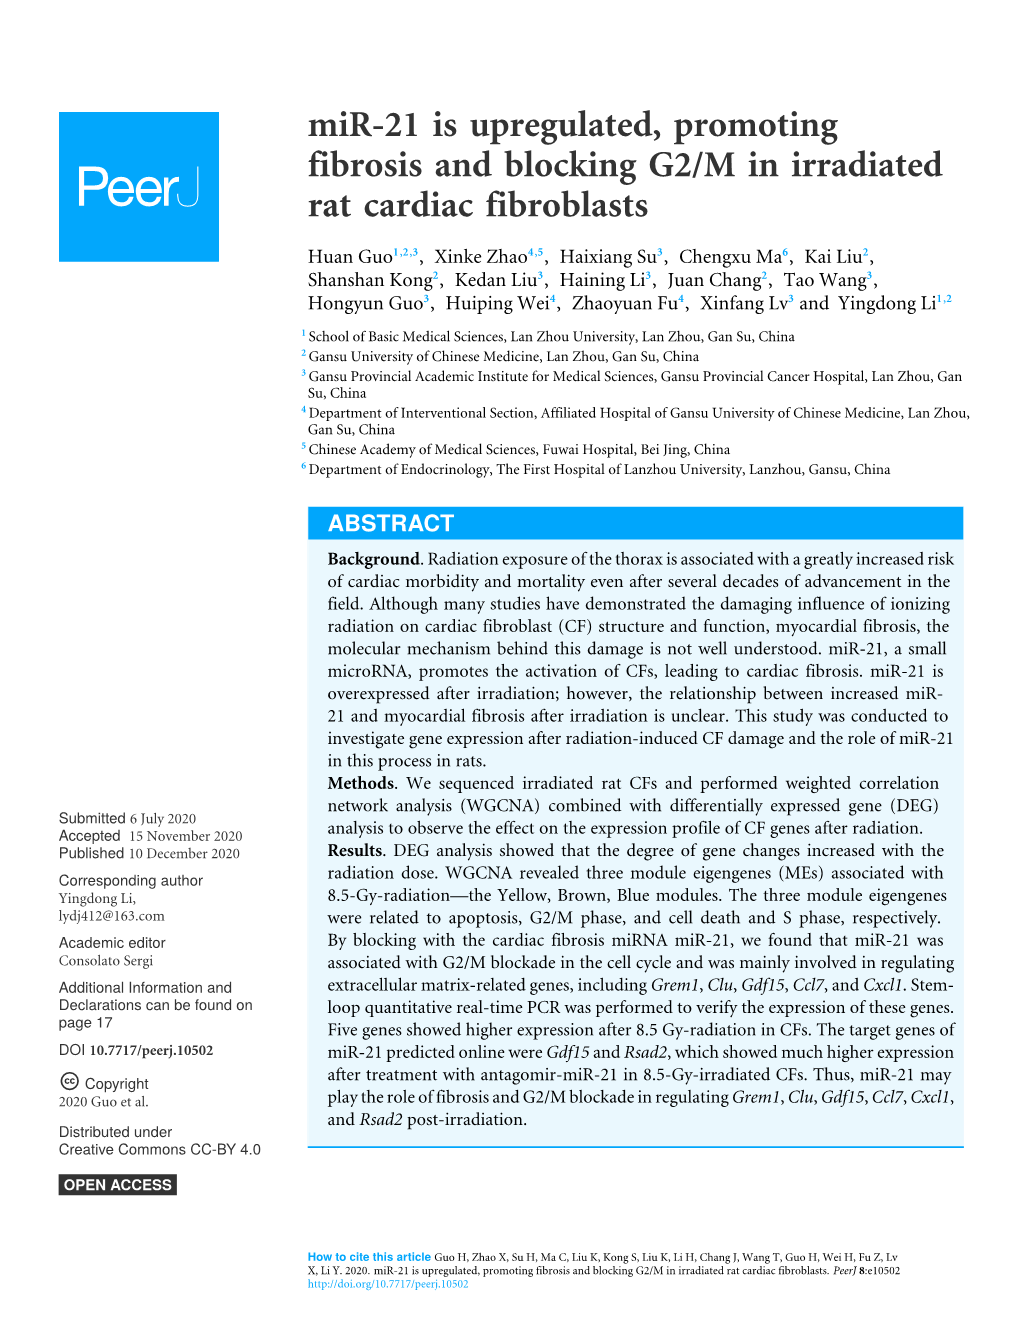 Mir-21 Is Upregulated, Promoting Fibrosis and Blocking G2/M in Irradiated Rat Cardiac Fibroblasts